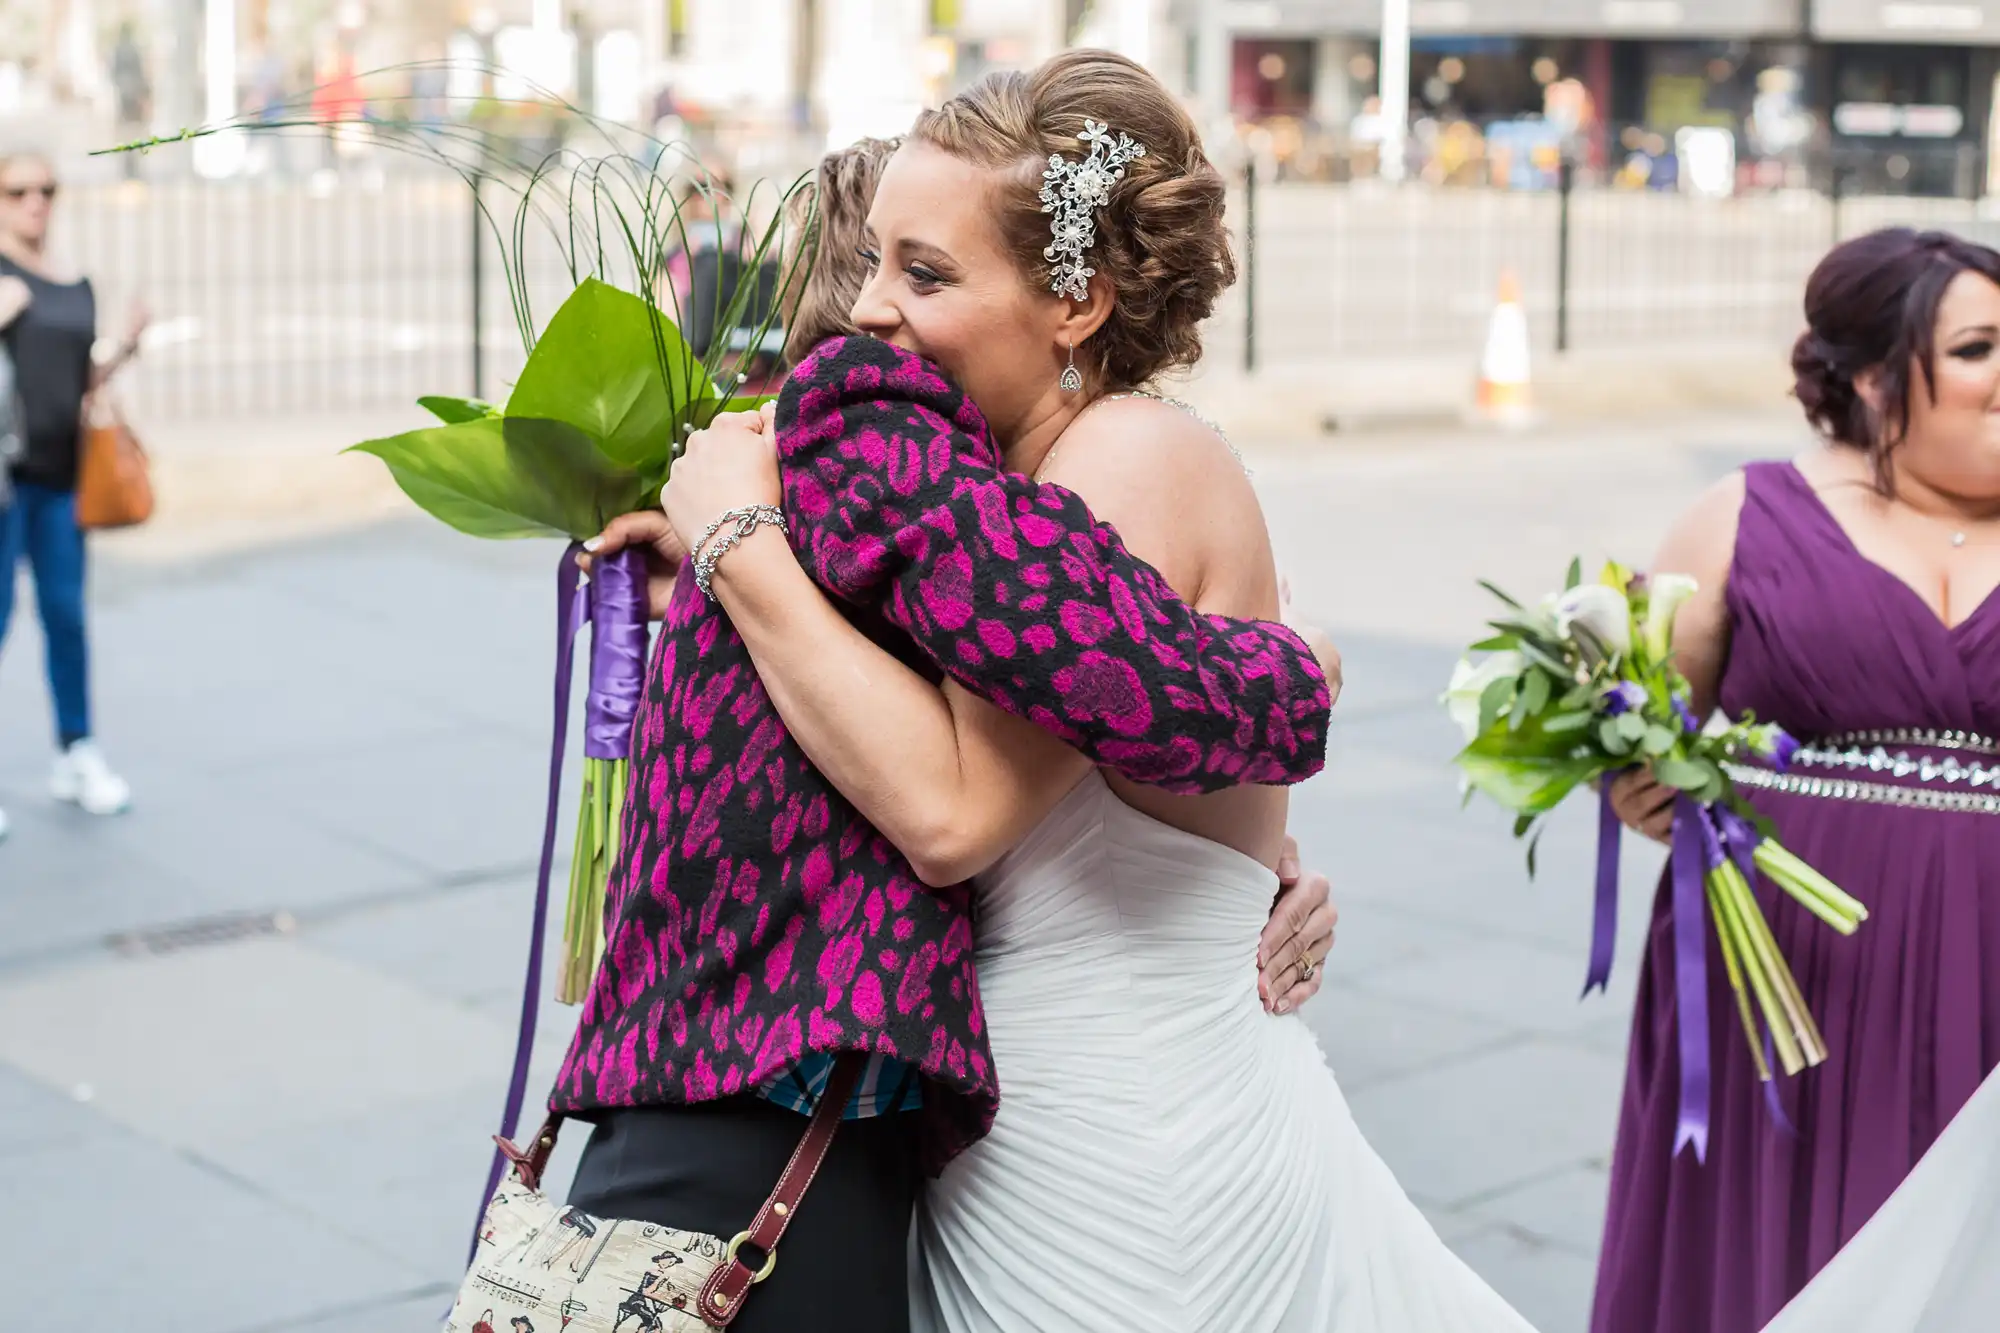 A bride in a white dress embracing a woman in a pink leopard print jacket on a city street, with a bridesmaid in purple nearby.